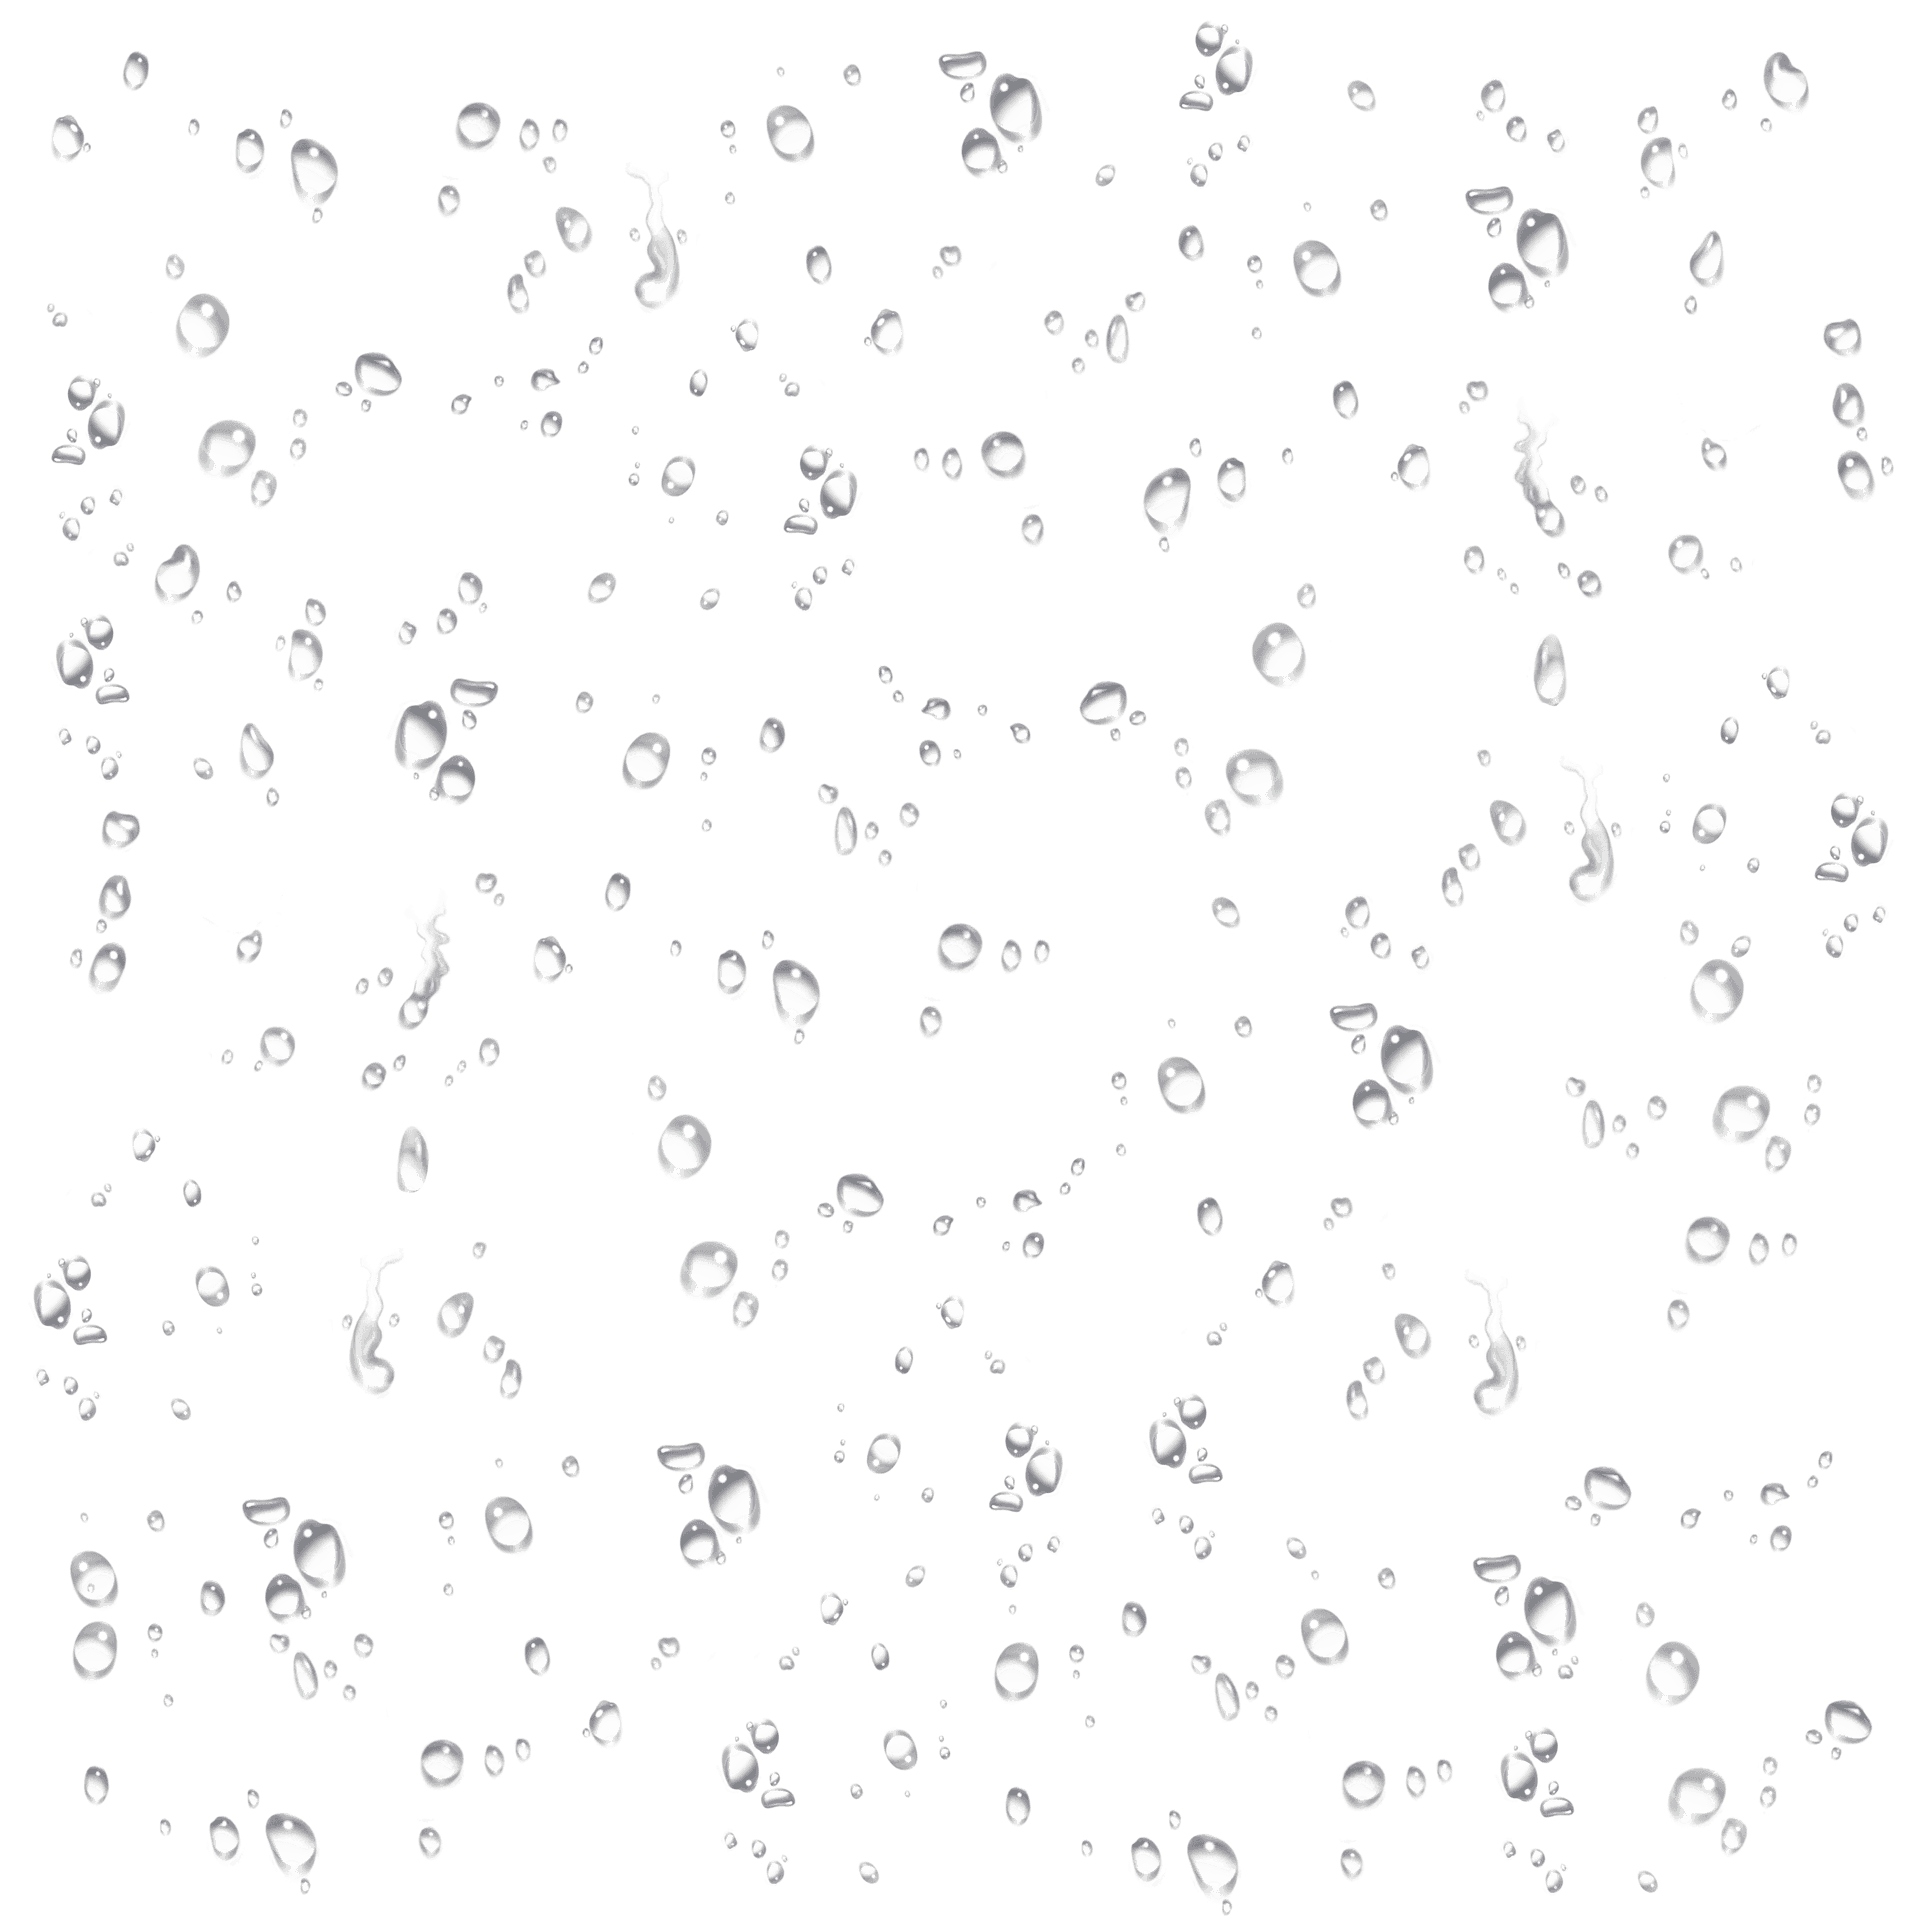 Raindropson Glass Texture PNG image